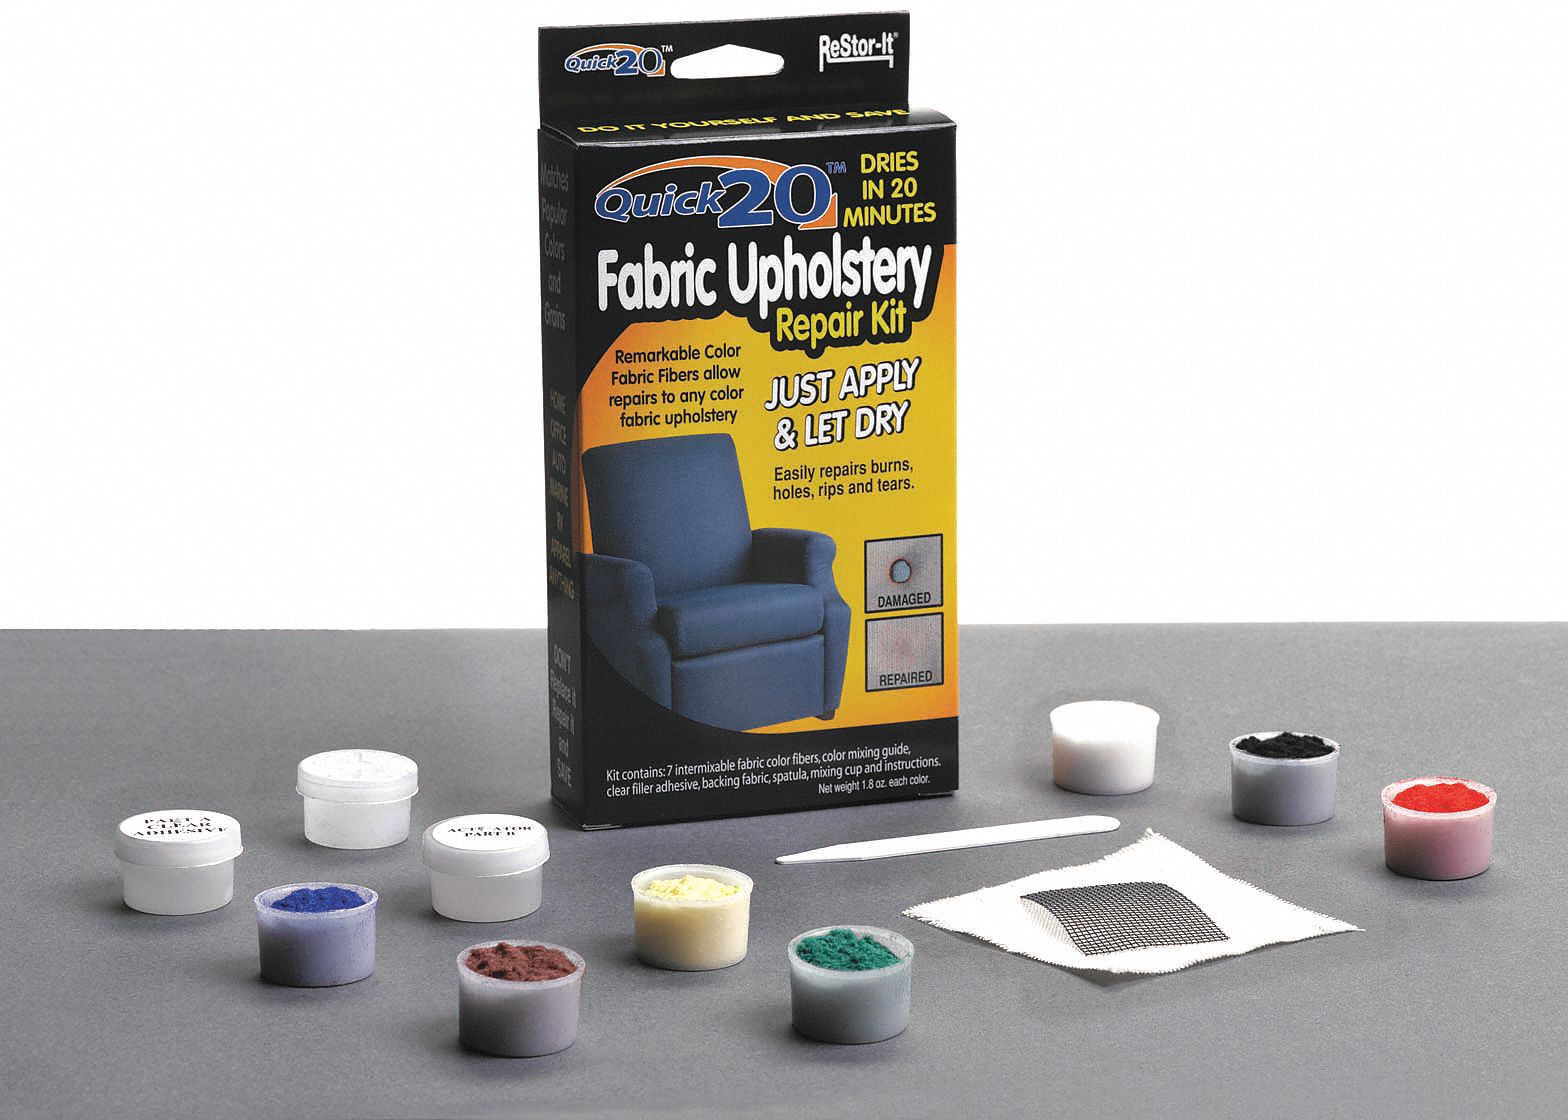 Furniture and Fabric Repair Kit: For Furniture and Fabric